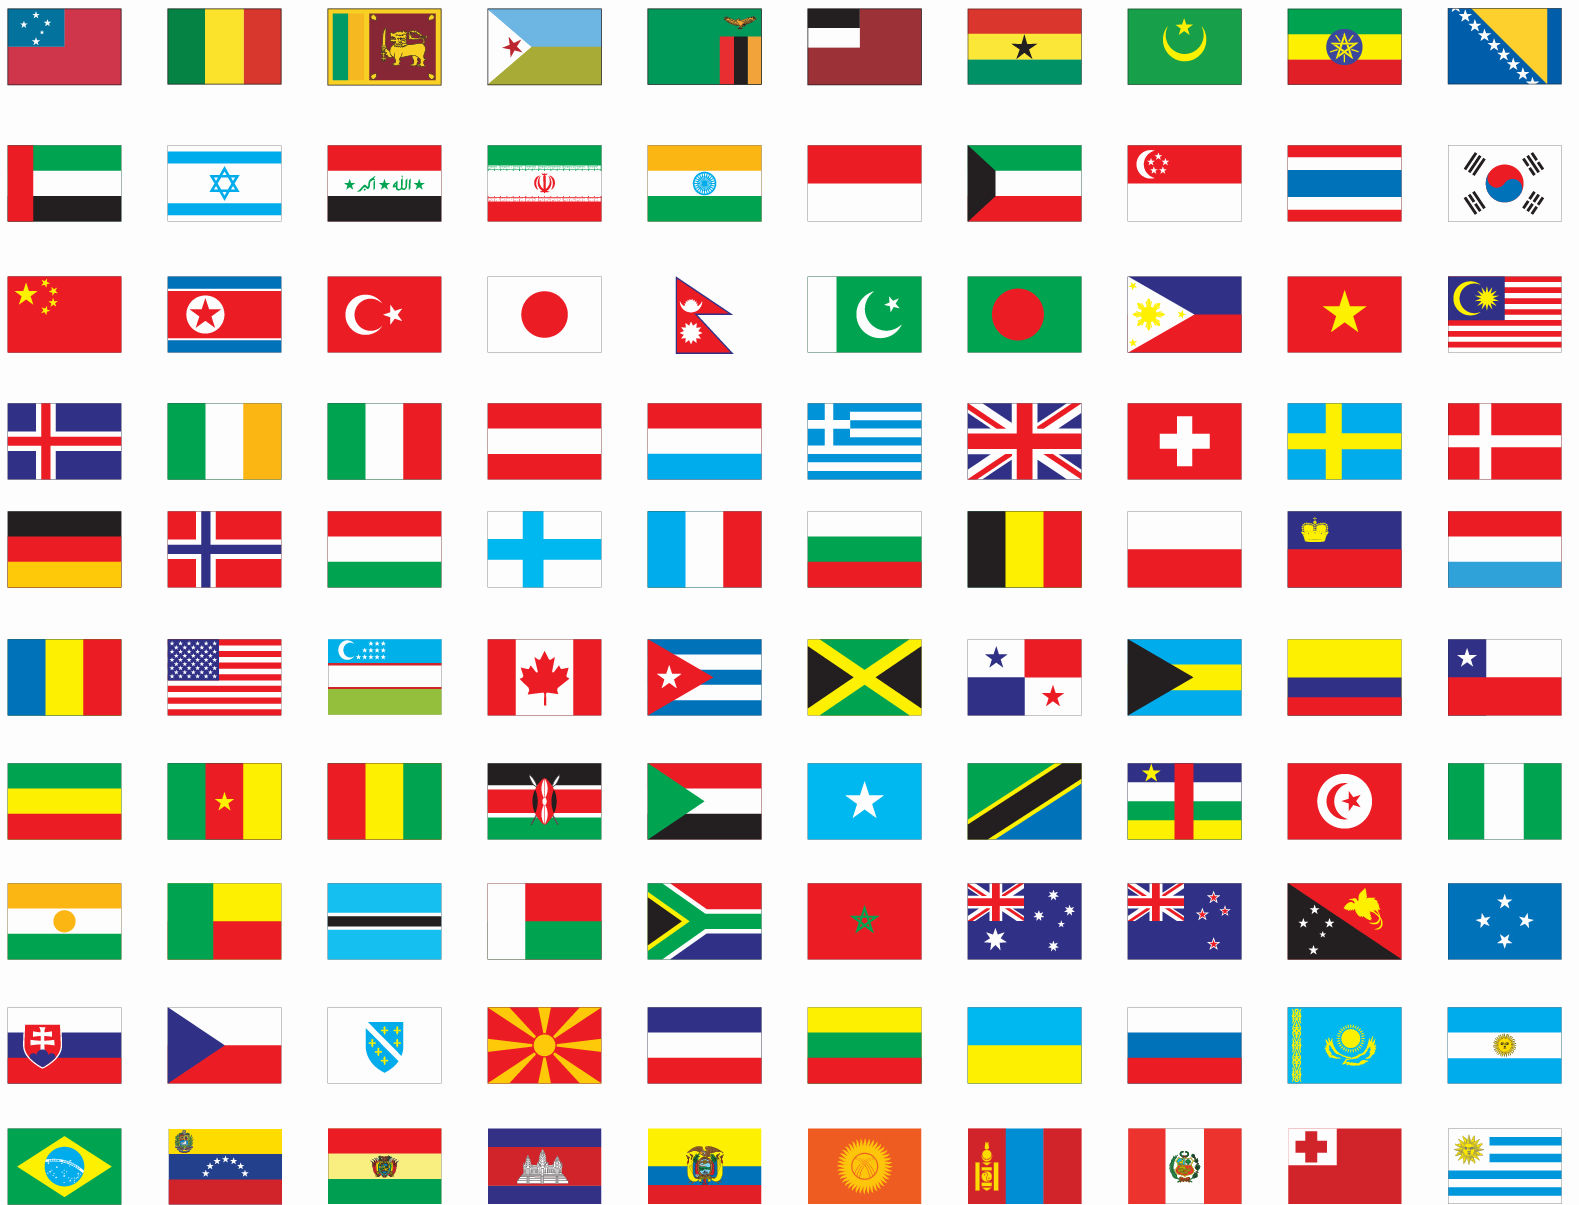 free-vector-flags-of-the-world-free-images-at-clker-vector-clip